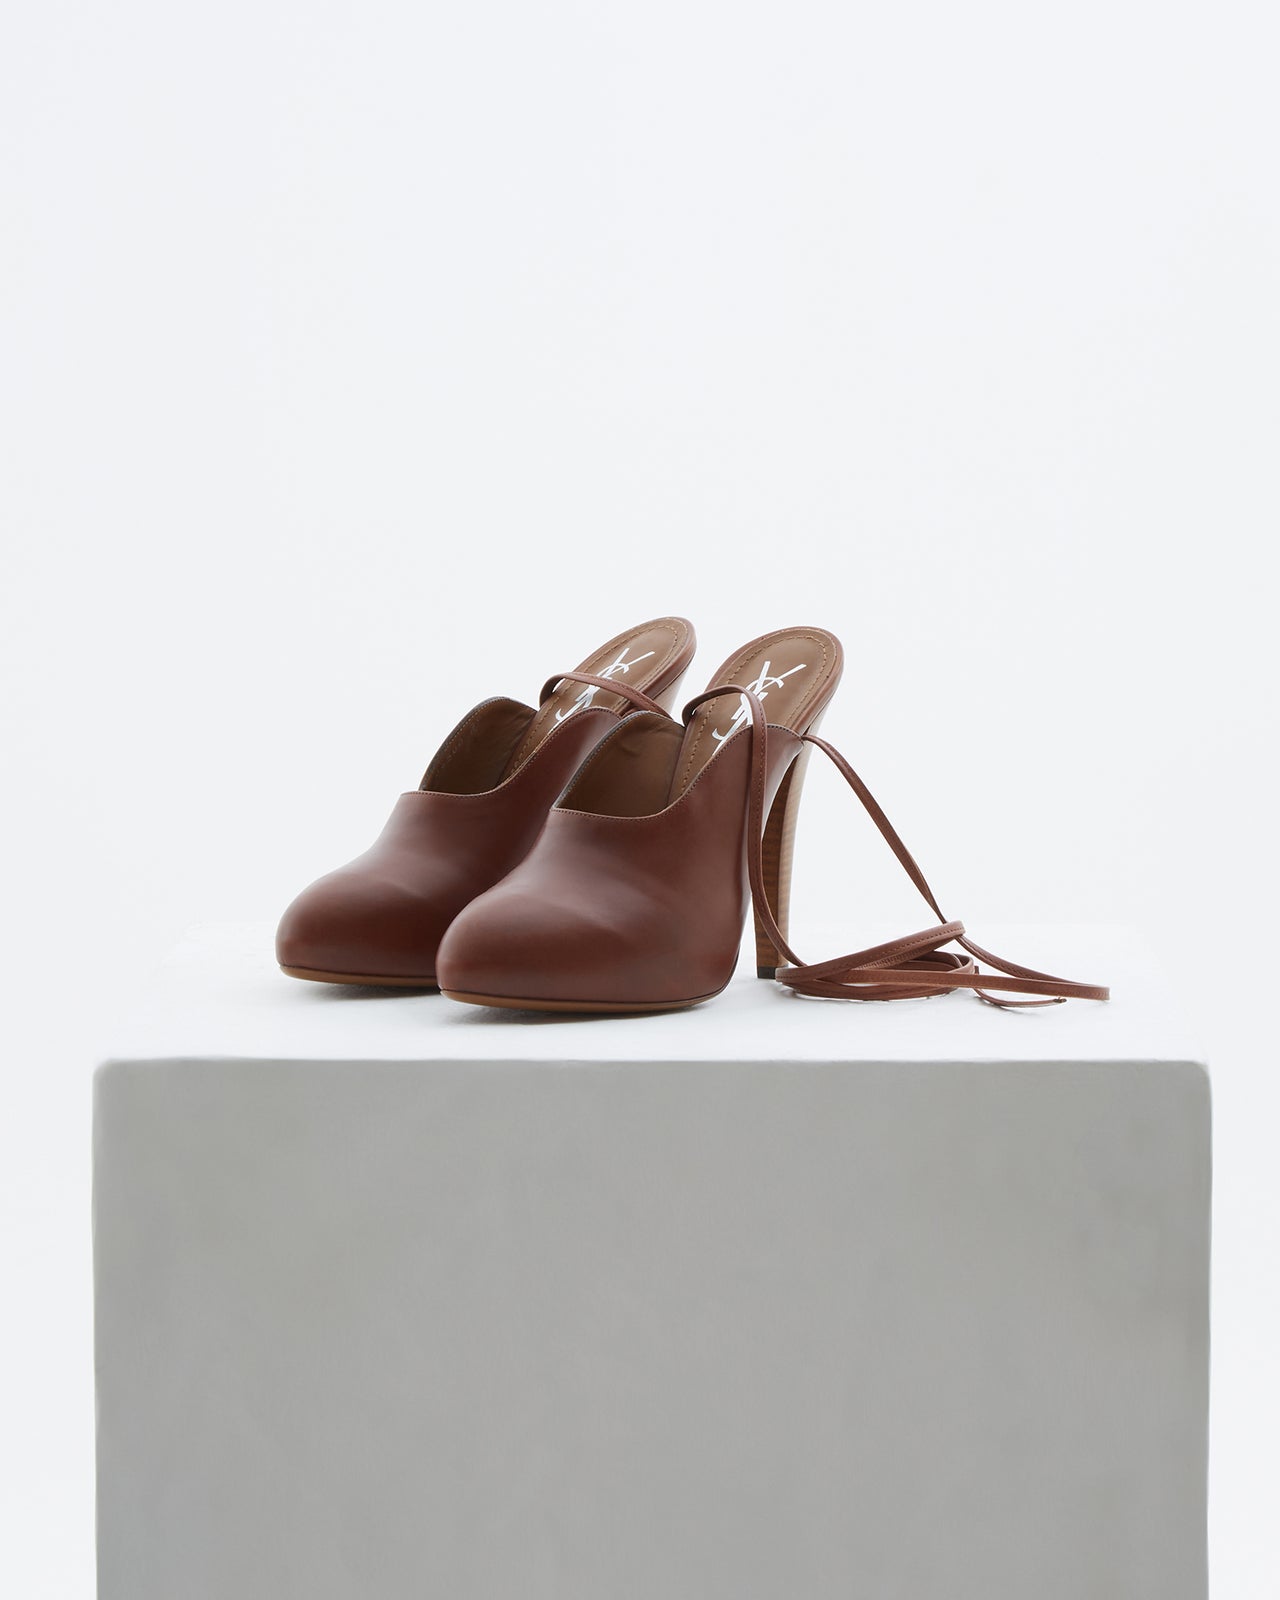 Yves Saint Laurent Resort 2010 Lace-up pointed toe leather heels